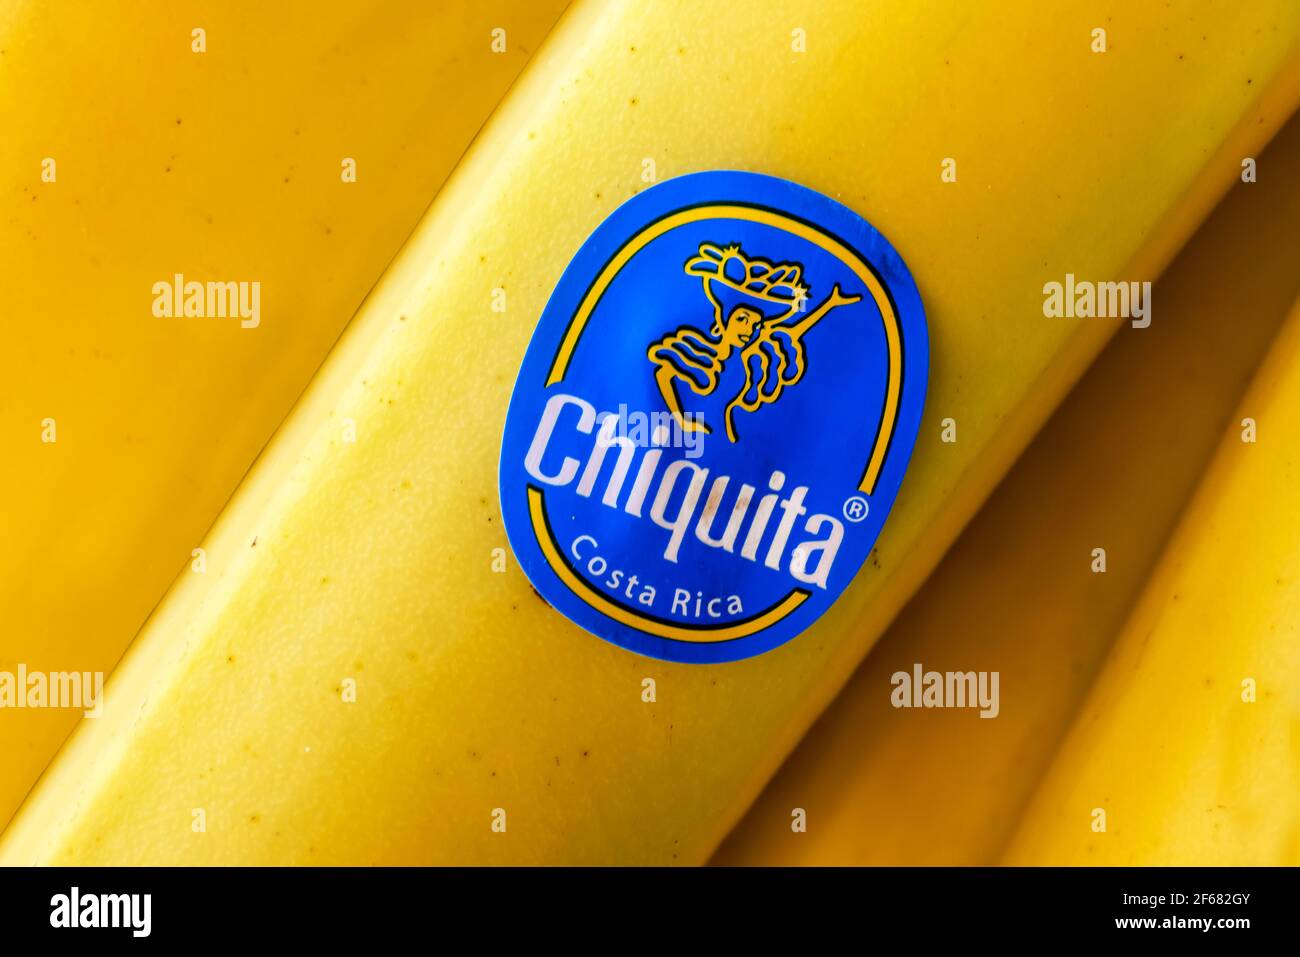 Ripe banana with Label of Chiquita. Close-up Stock Photo